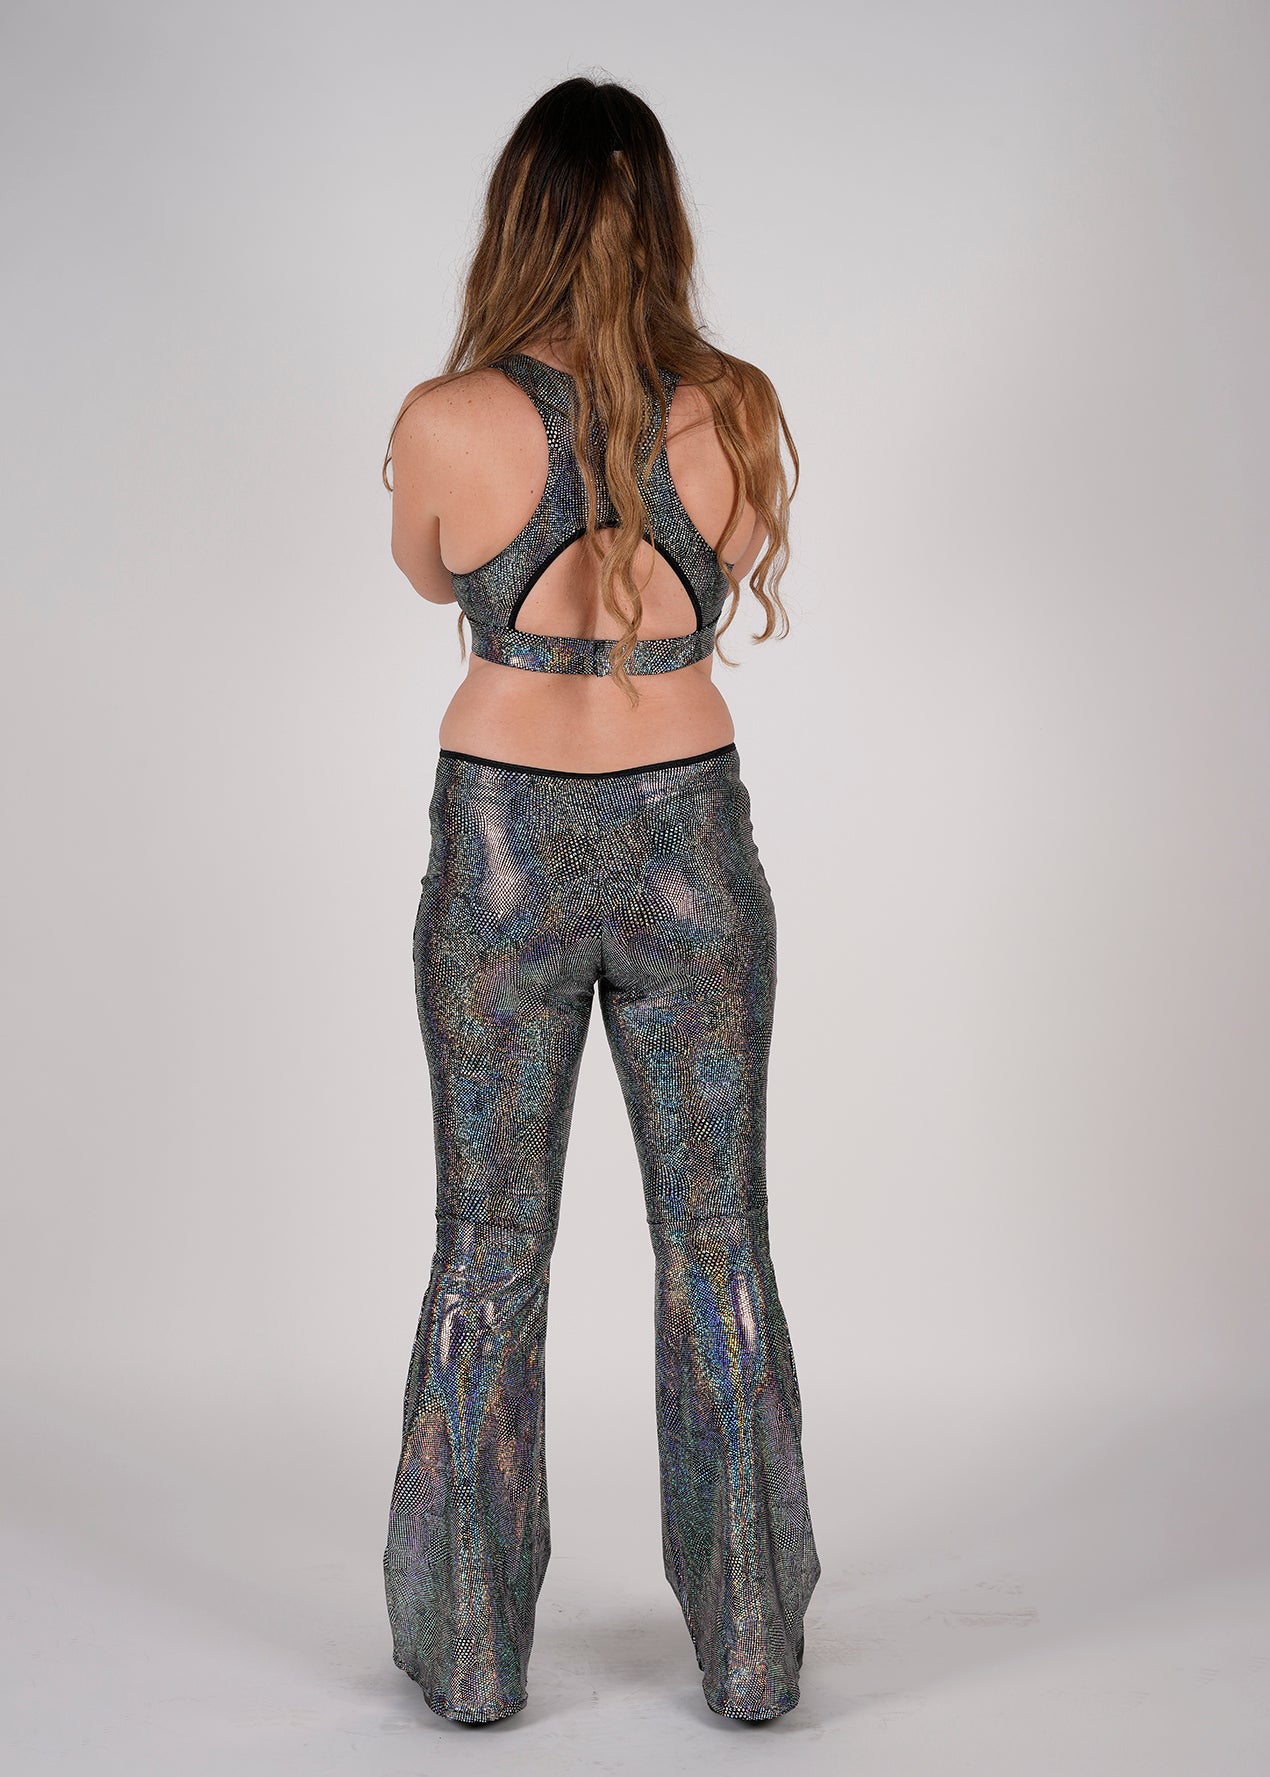 Unisex-music fesival fashion - Festival-outfit-rave-outfit - handmade-in-Brooklyn-New York City-custom made-waste conscious– retro style – hippie fashion –handmade –  Ready-Diva-One Jumpsuit – two-piece with clasp – versatile festival wear – racerback – bellbottoms - back view on model - mercury sparkle silver print